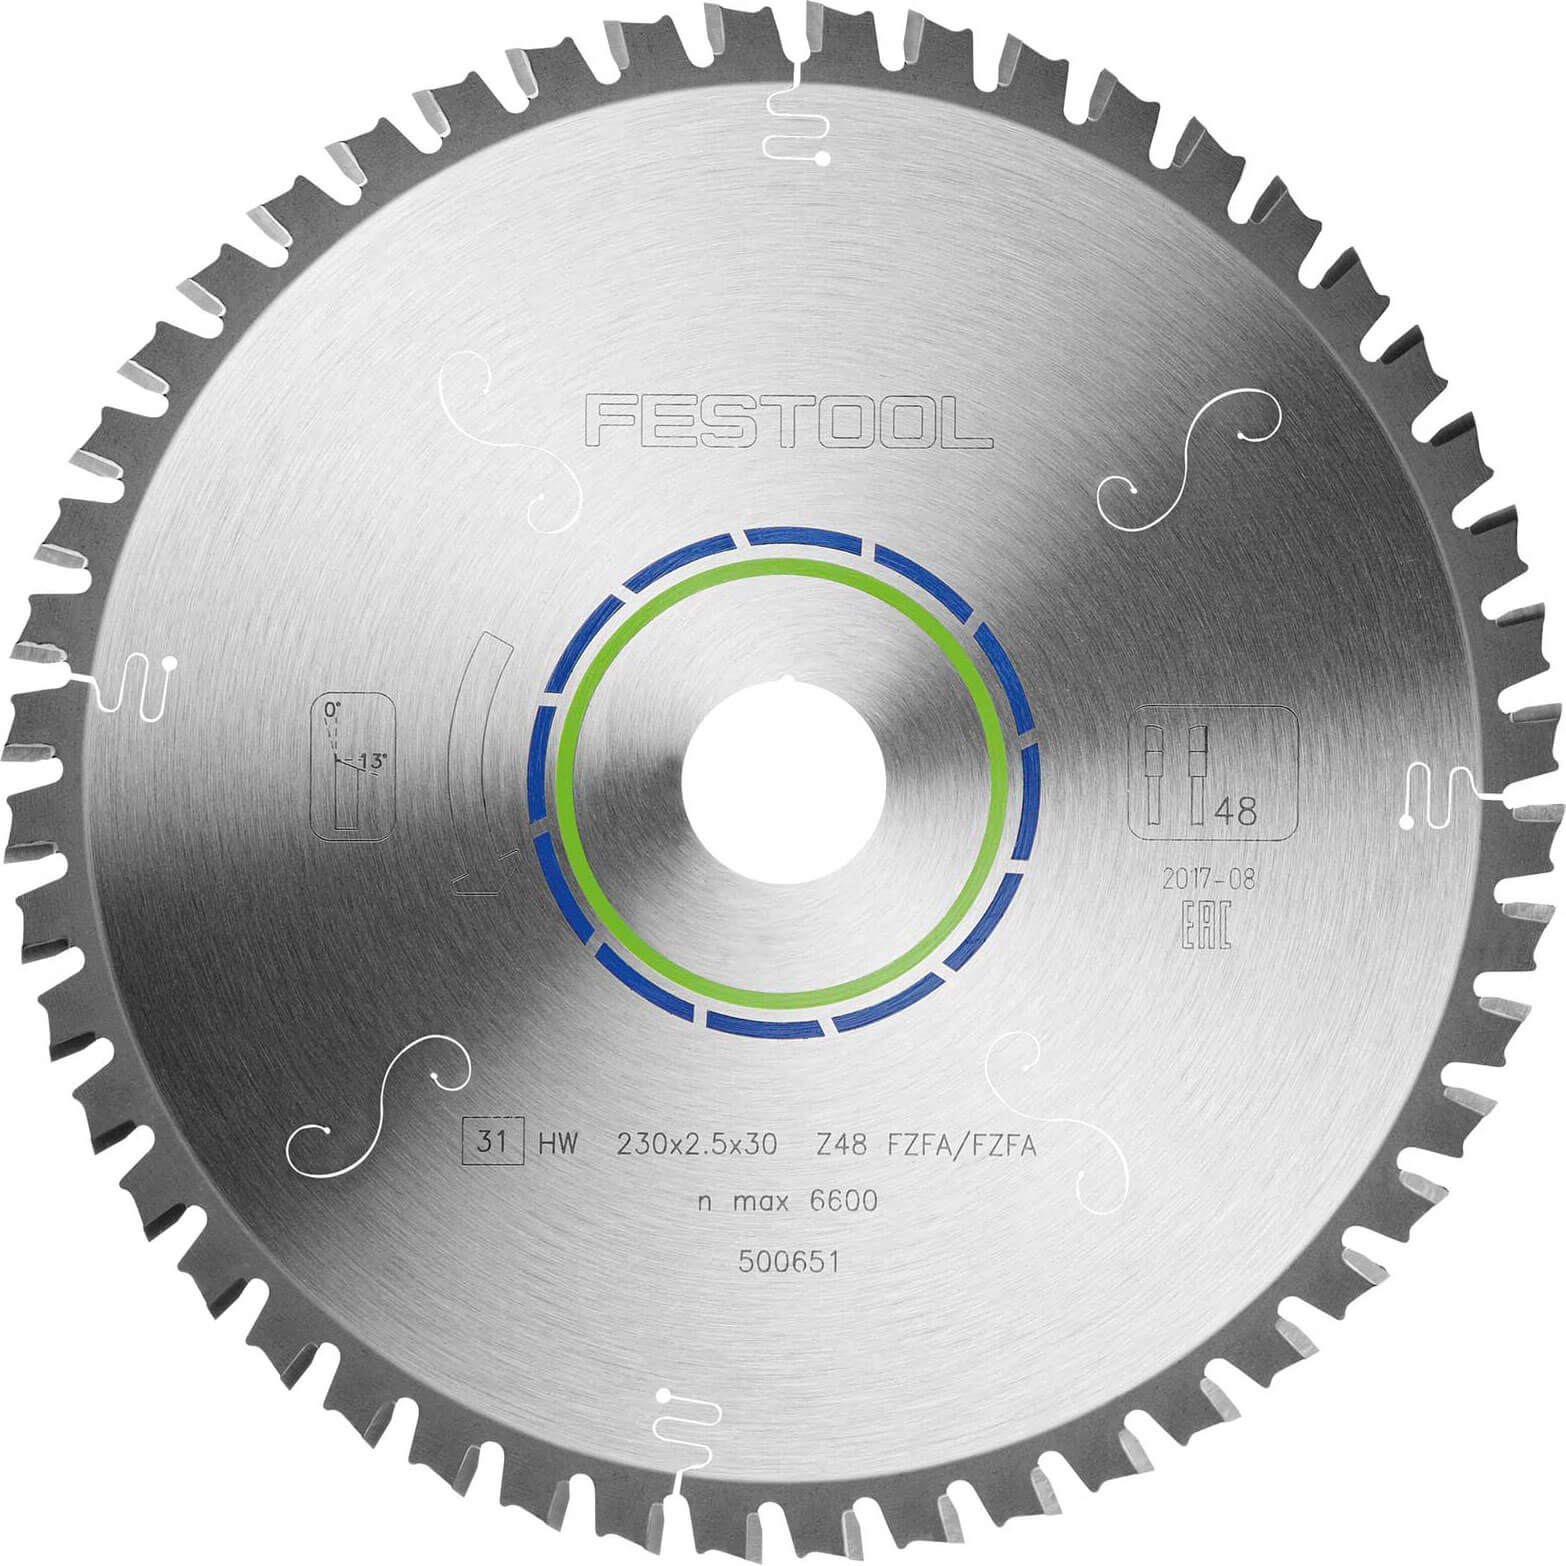 Photos - Power Tool Accessory Festool Flat Toothed Metal Cutting Circular Saw Blade 230mm 48T 30mm 50065 